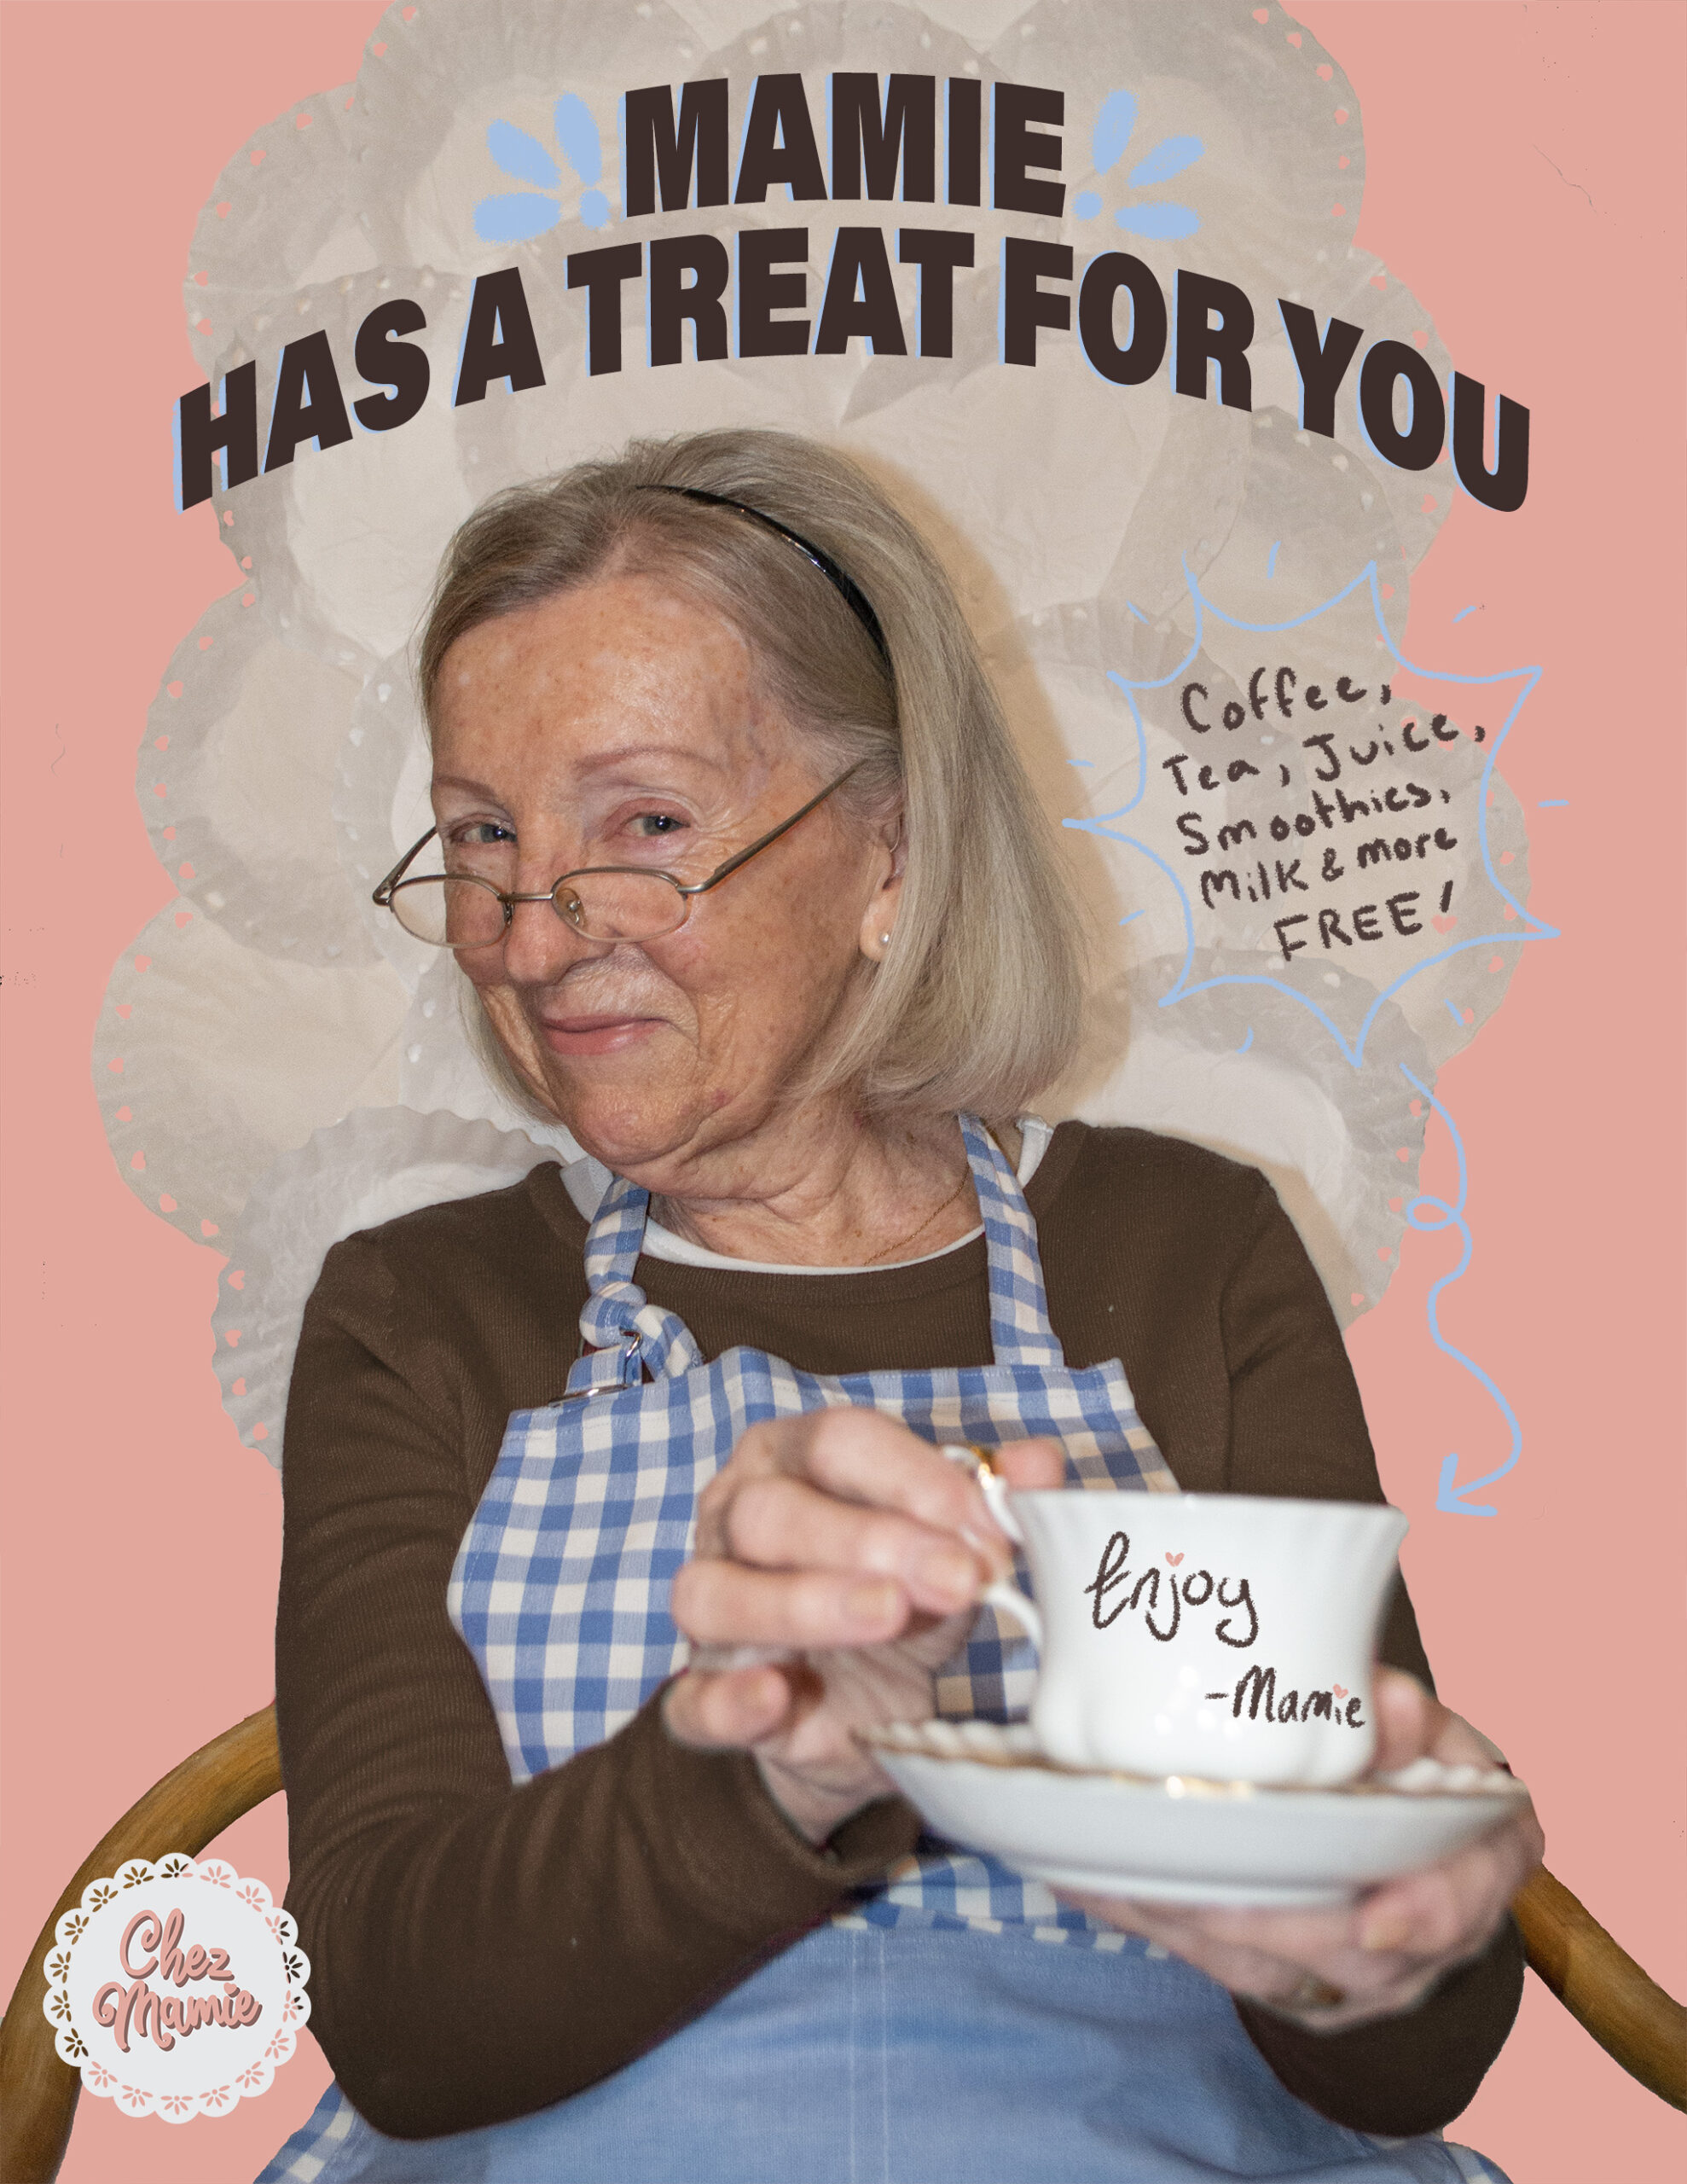 Image of ad for fictional cafe Chez Mamie featuring large scale image of a grandma holding a tea cup whilst sitting on a doily throne. Banner text reads "Mamie has a treat for you"